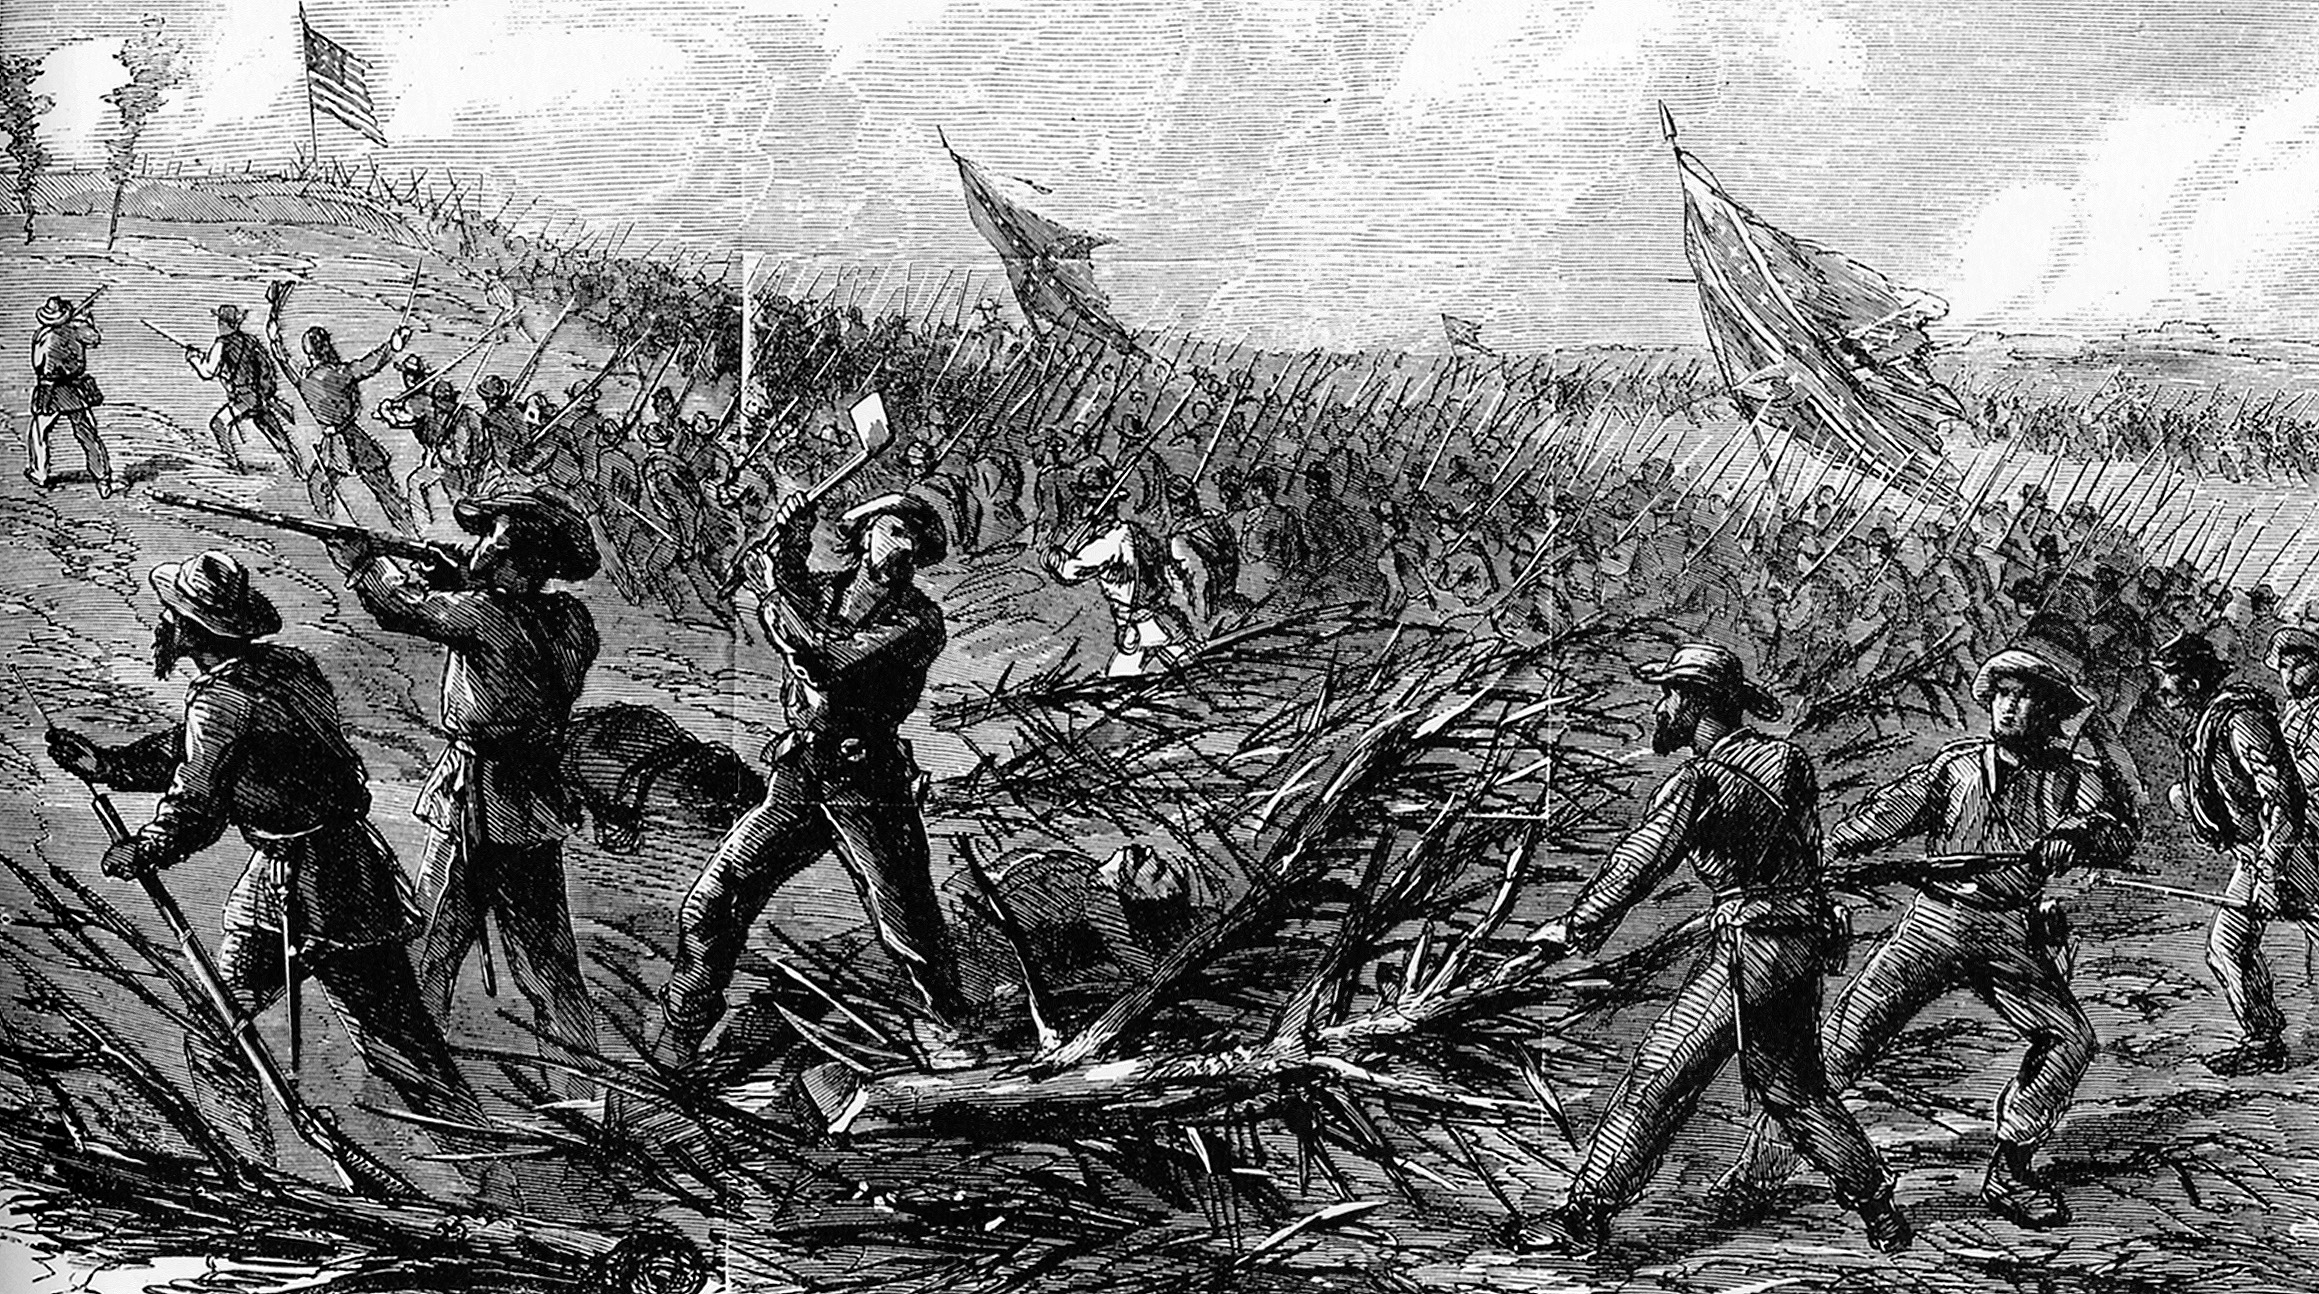 Confederate axemen chop through the barricades surrounding Ft. Stedmen as troops pour through the gaps of the now-breached defenses.